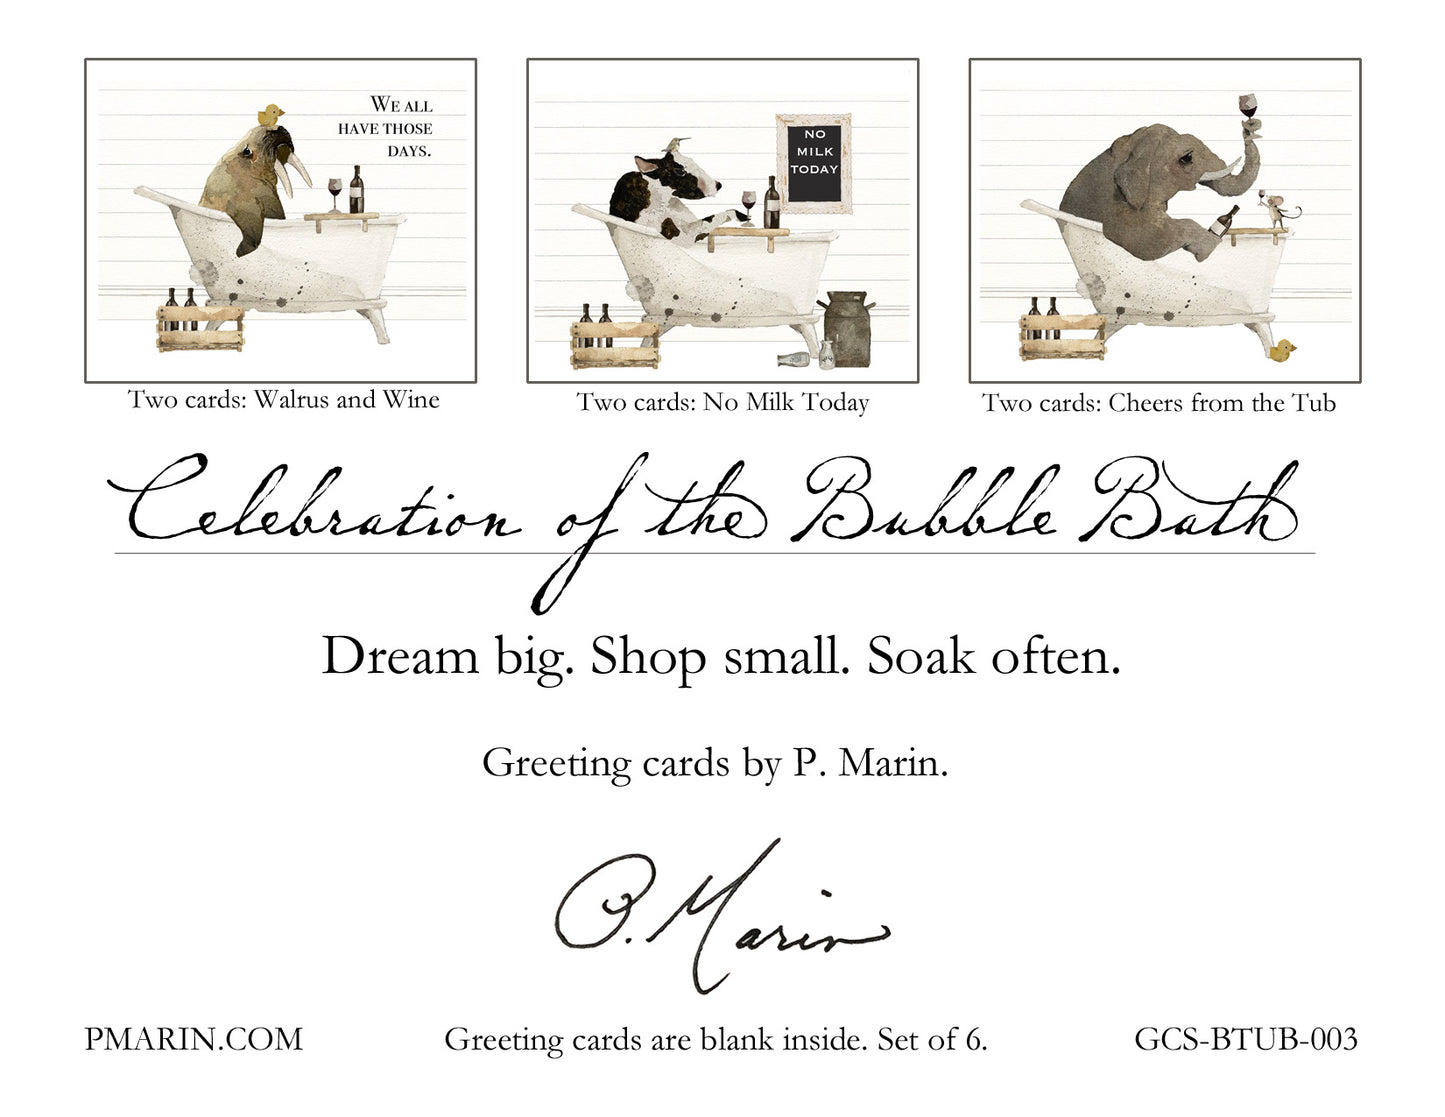 Boxed Greeting Card Set - Celebration of the Bubble Bath: Cheers from the Tub!